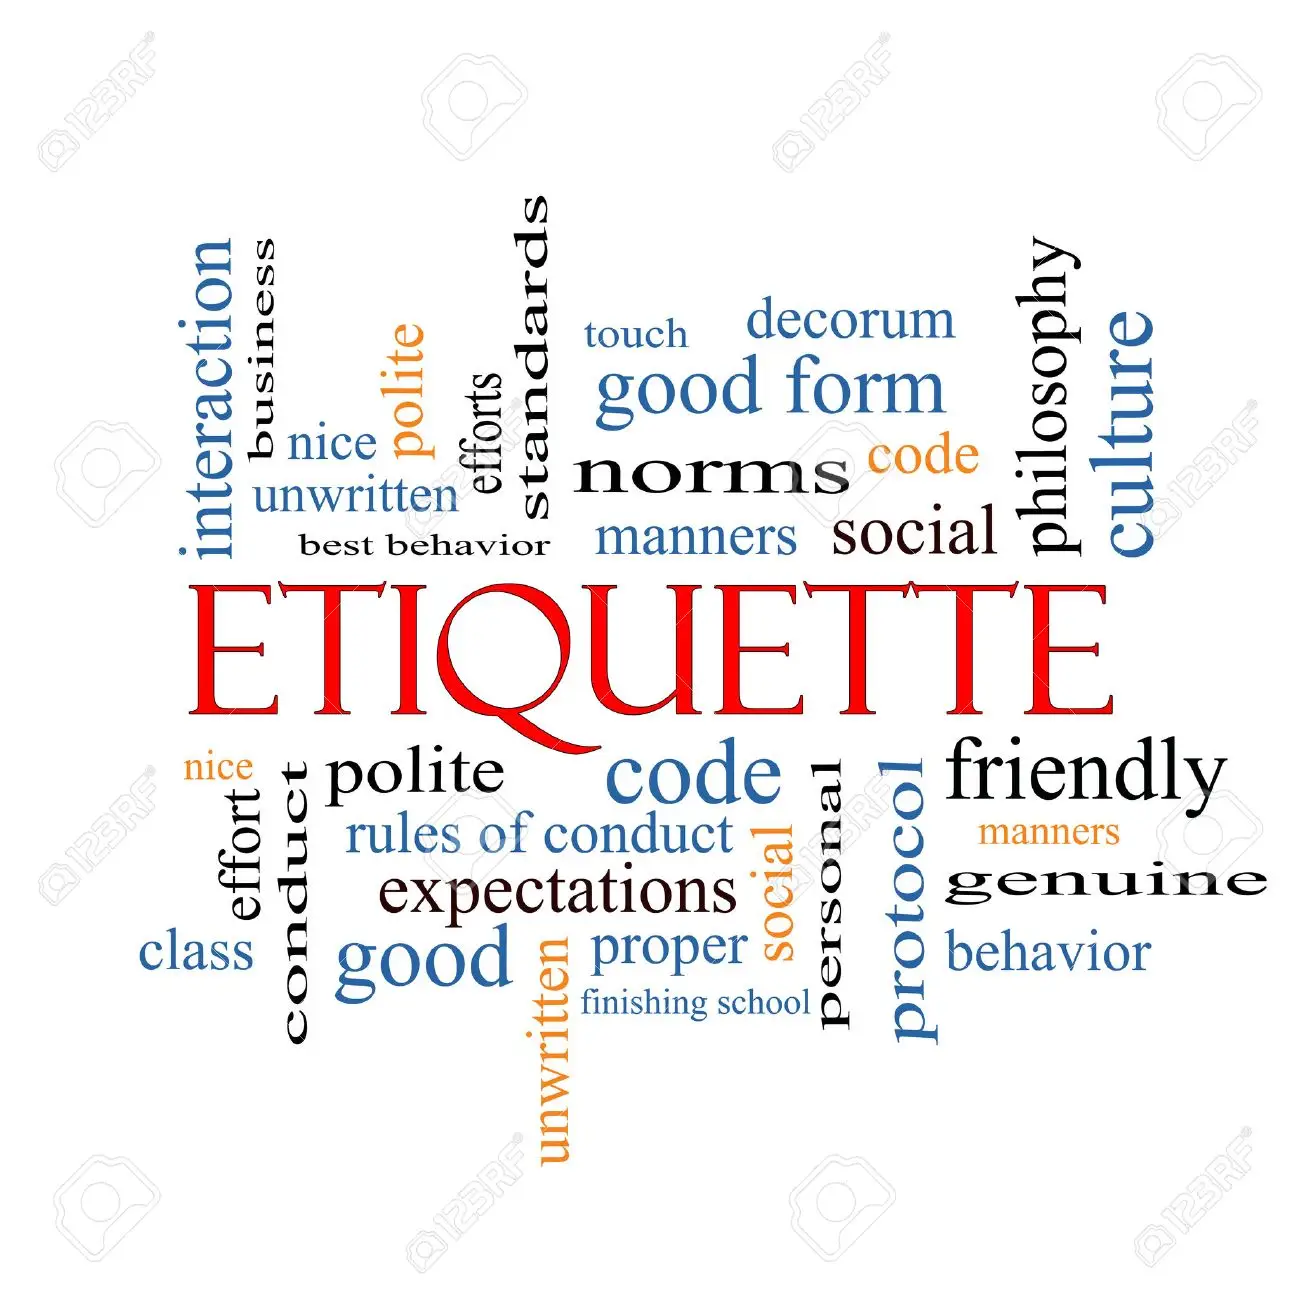 How etiquette has changed over the last twenty years - Clise Etiquette